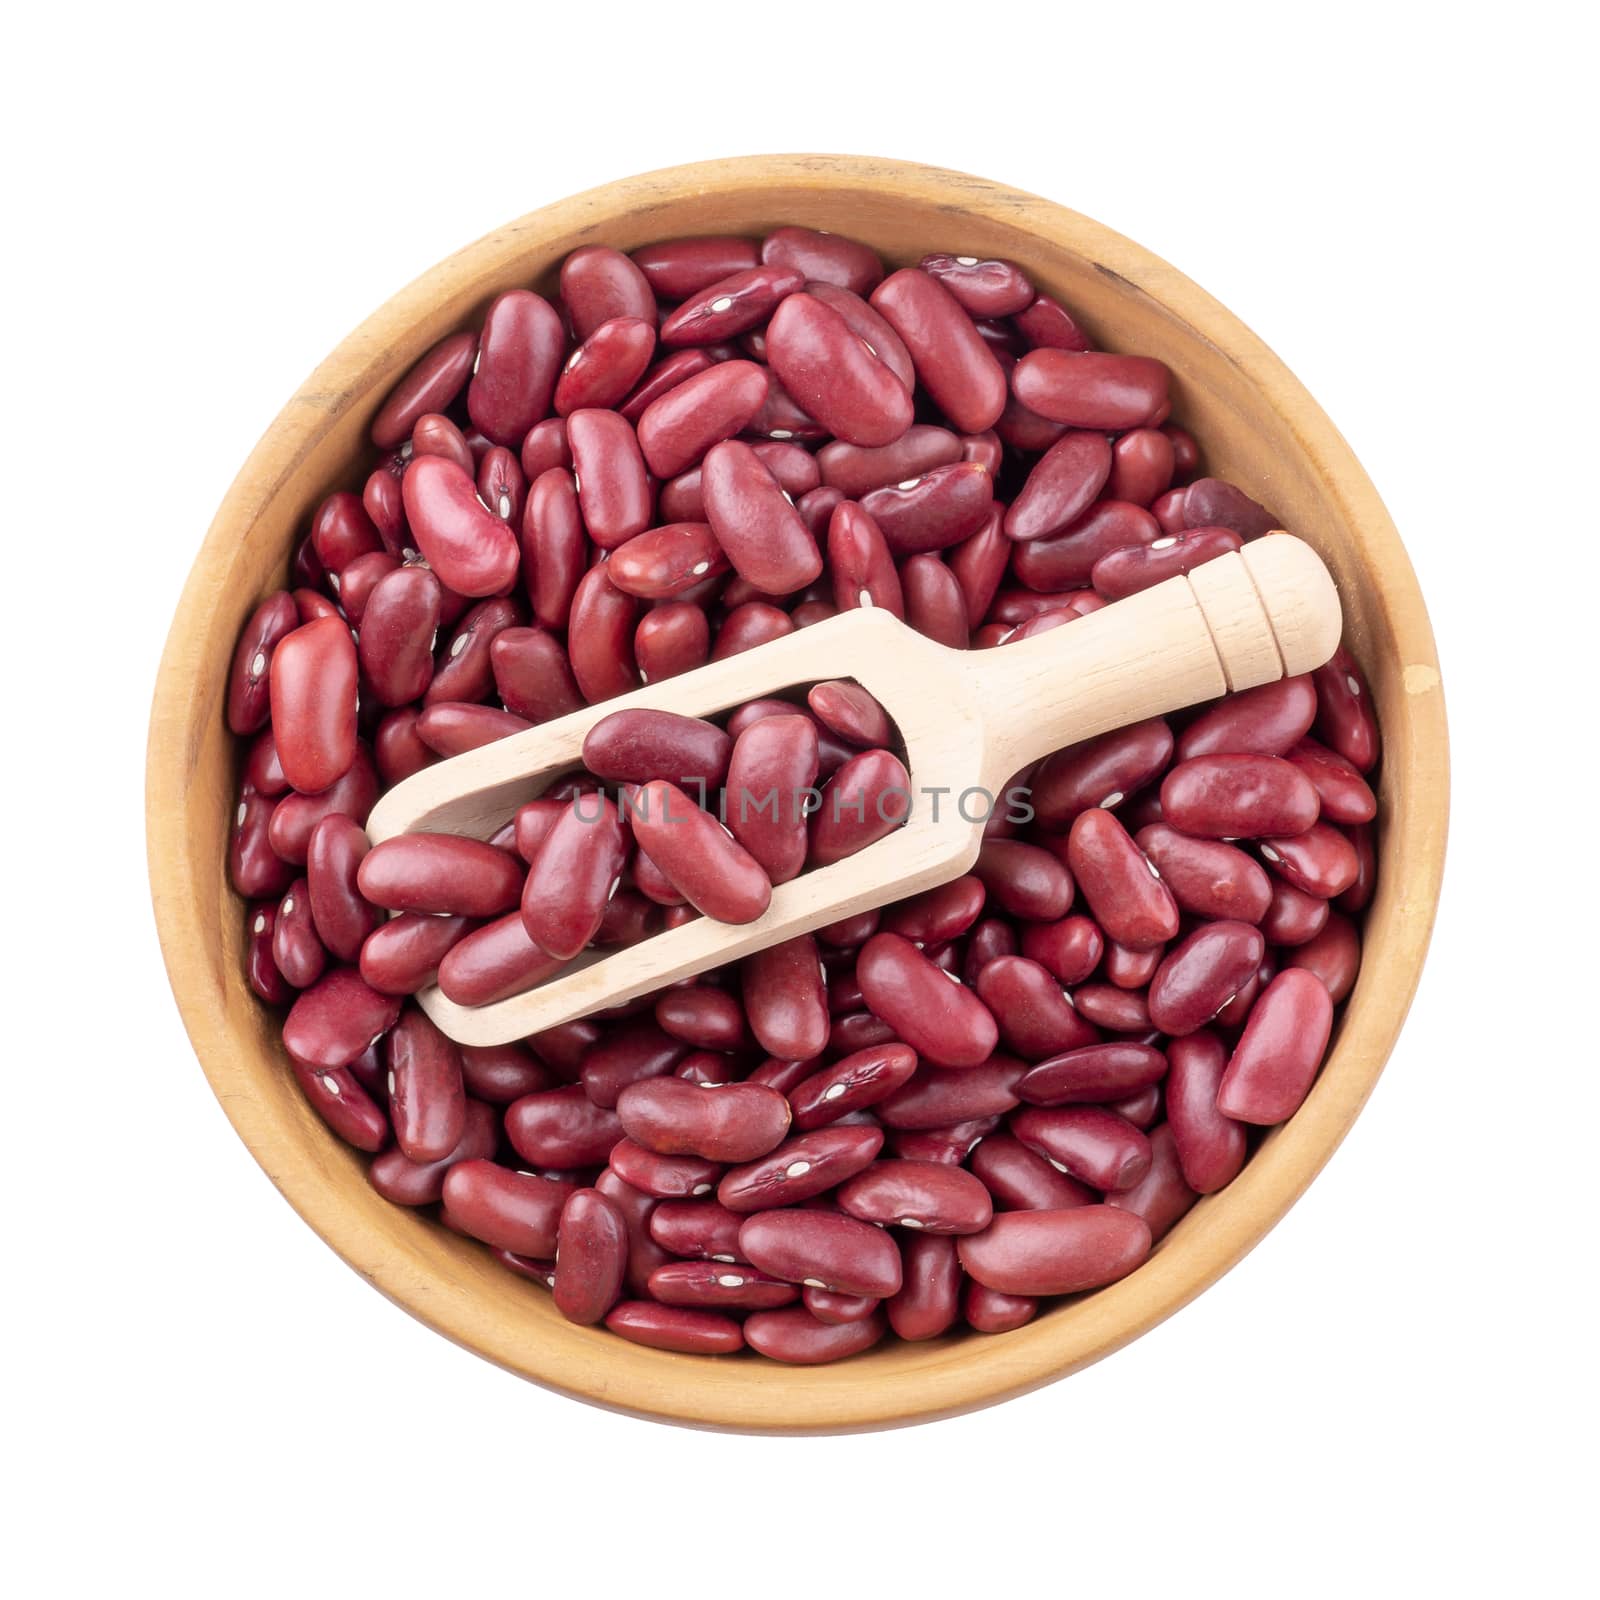 red beans in a wooden bowl isolated on white background by kaiskynet